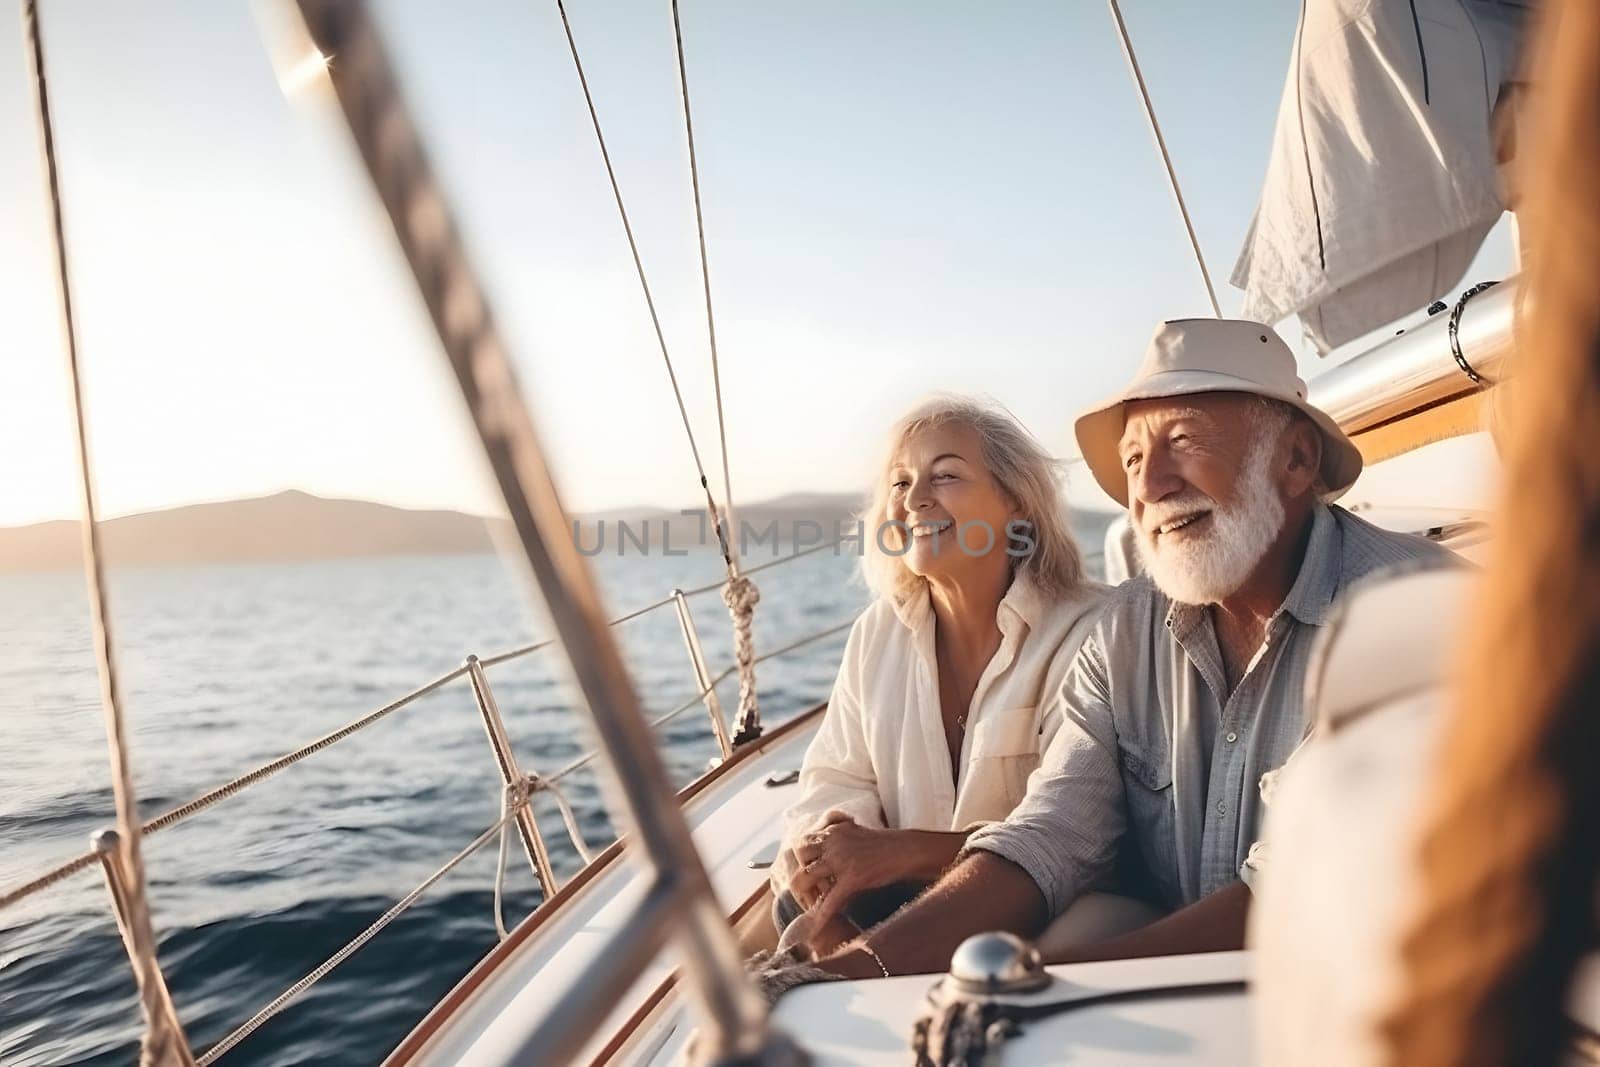 Beautiful and happy senior caucasian couple on a sailboat at sunset or sunrise, neural network generated image by z1b